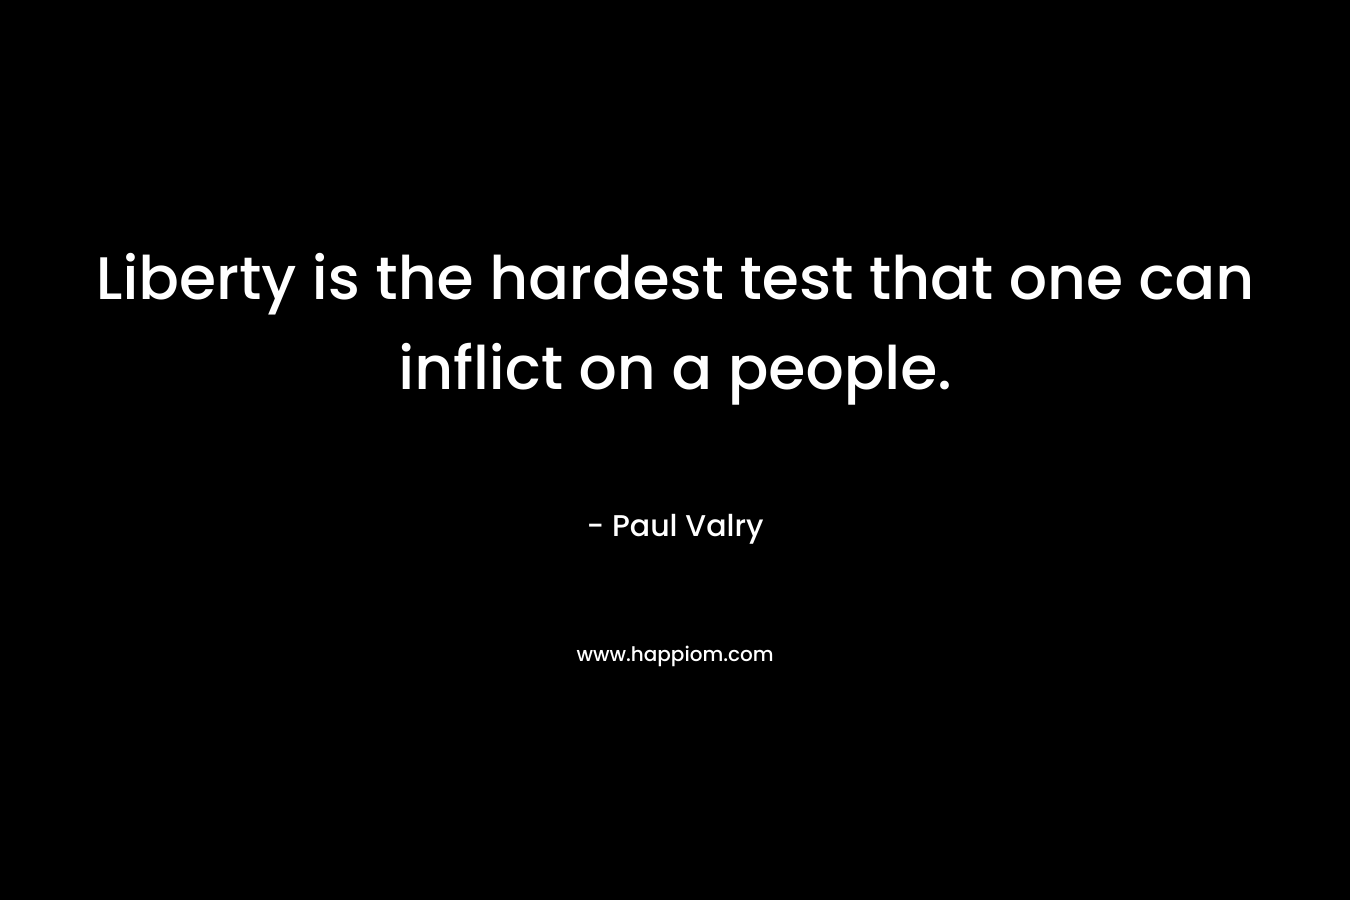 Liberty is the hardest test that one can inflict on a people. – Paul Valry